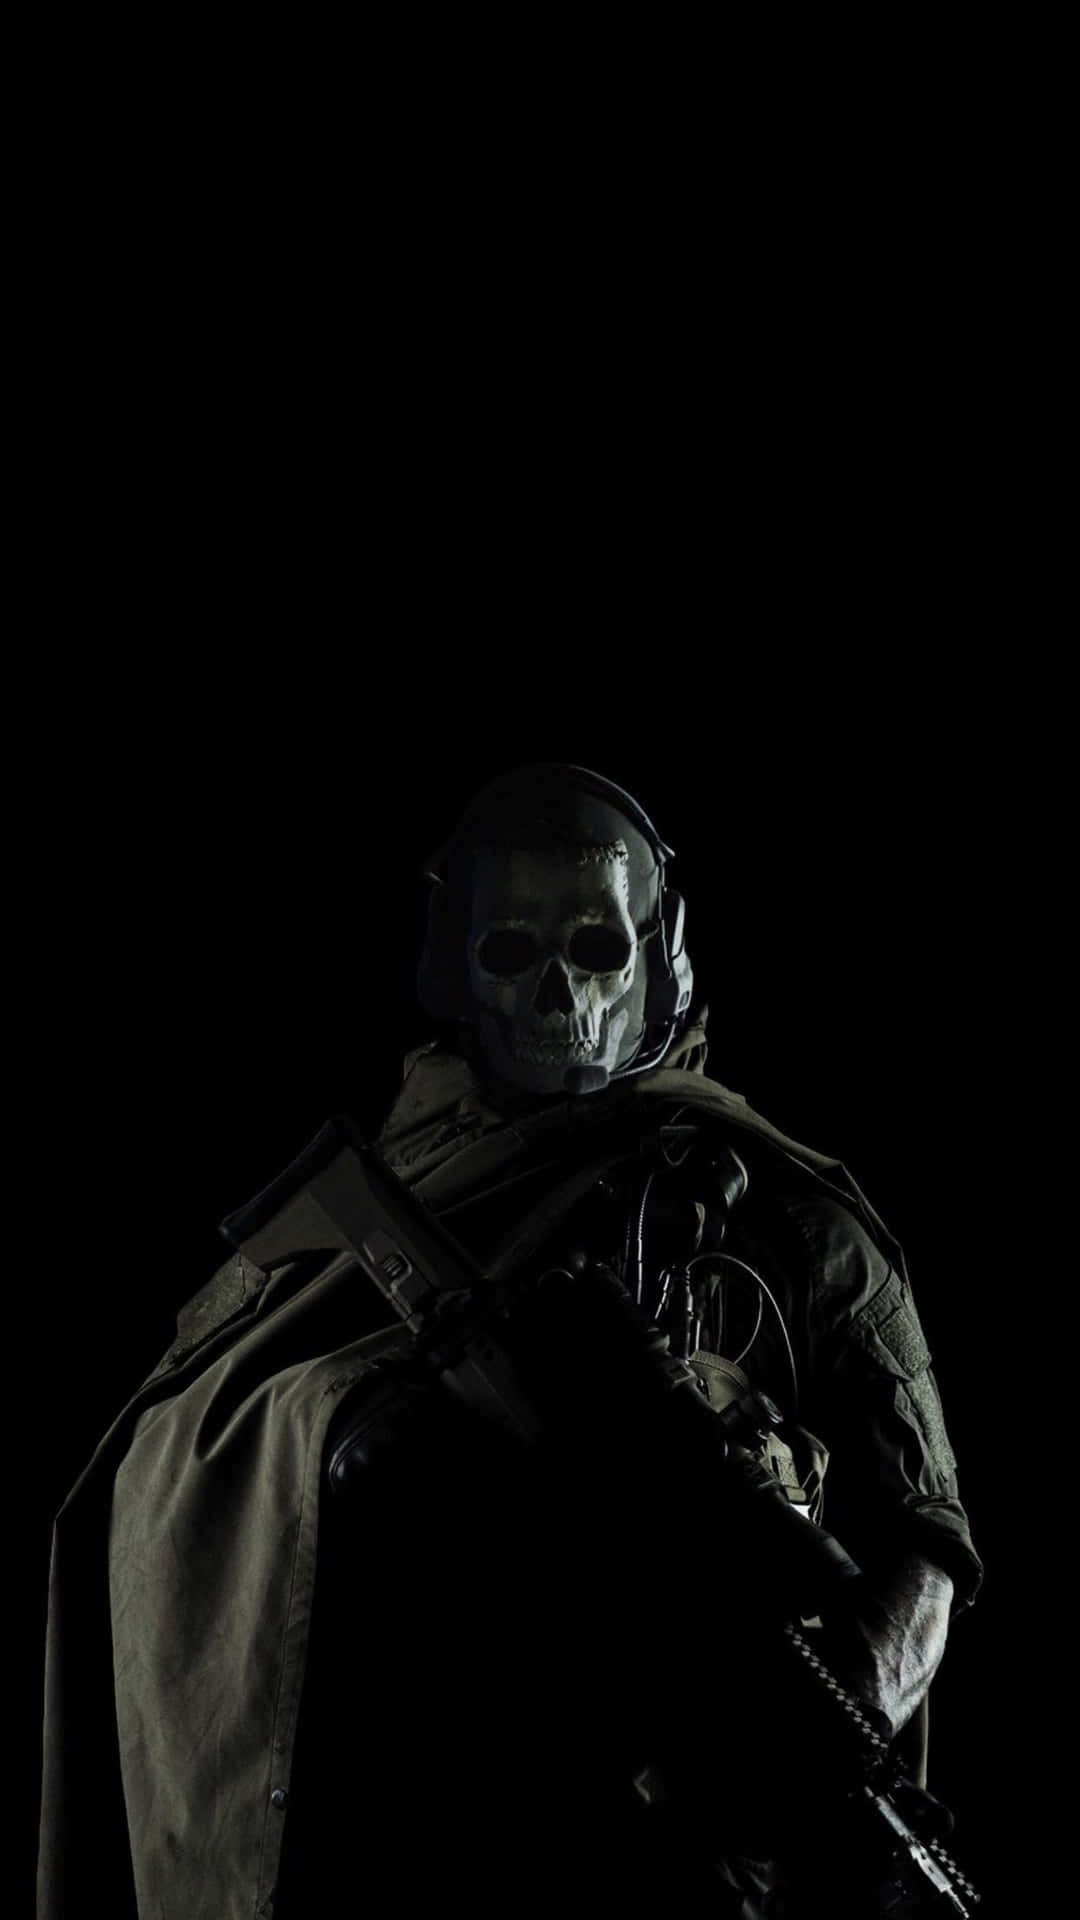 Stealthy Simon Ghost Riley ready for action Wallpaper